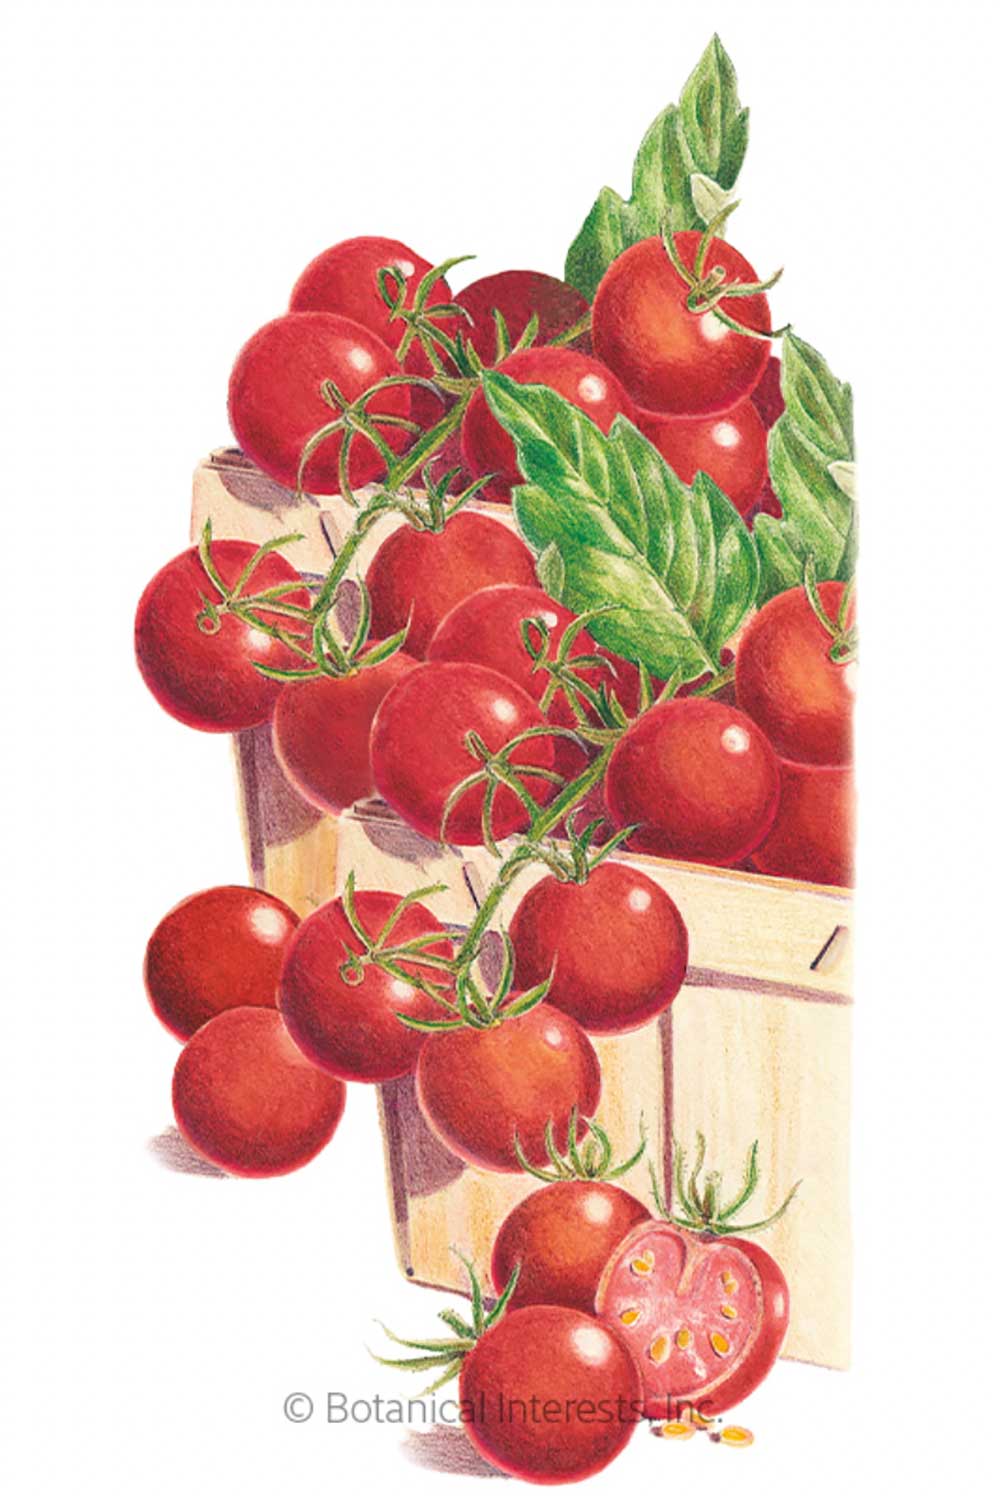 dwarf-cherry-tomato-varieties-for-small-spaces